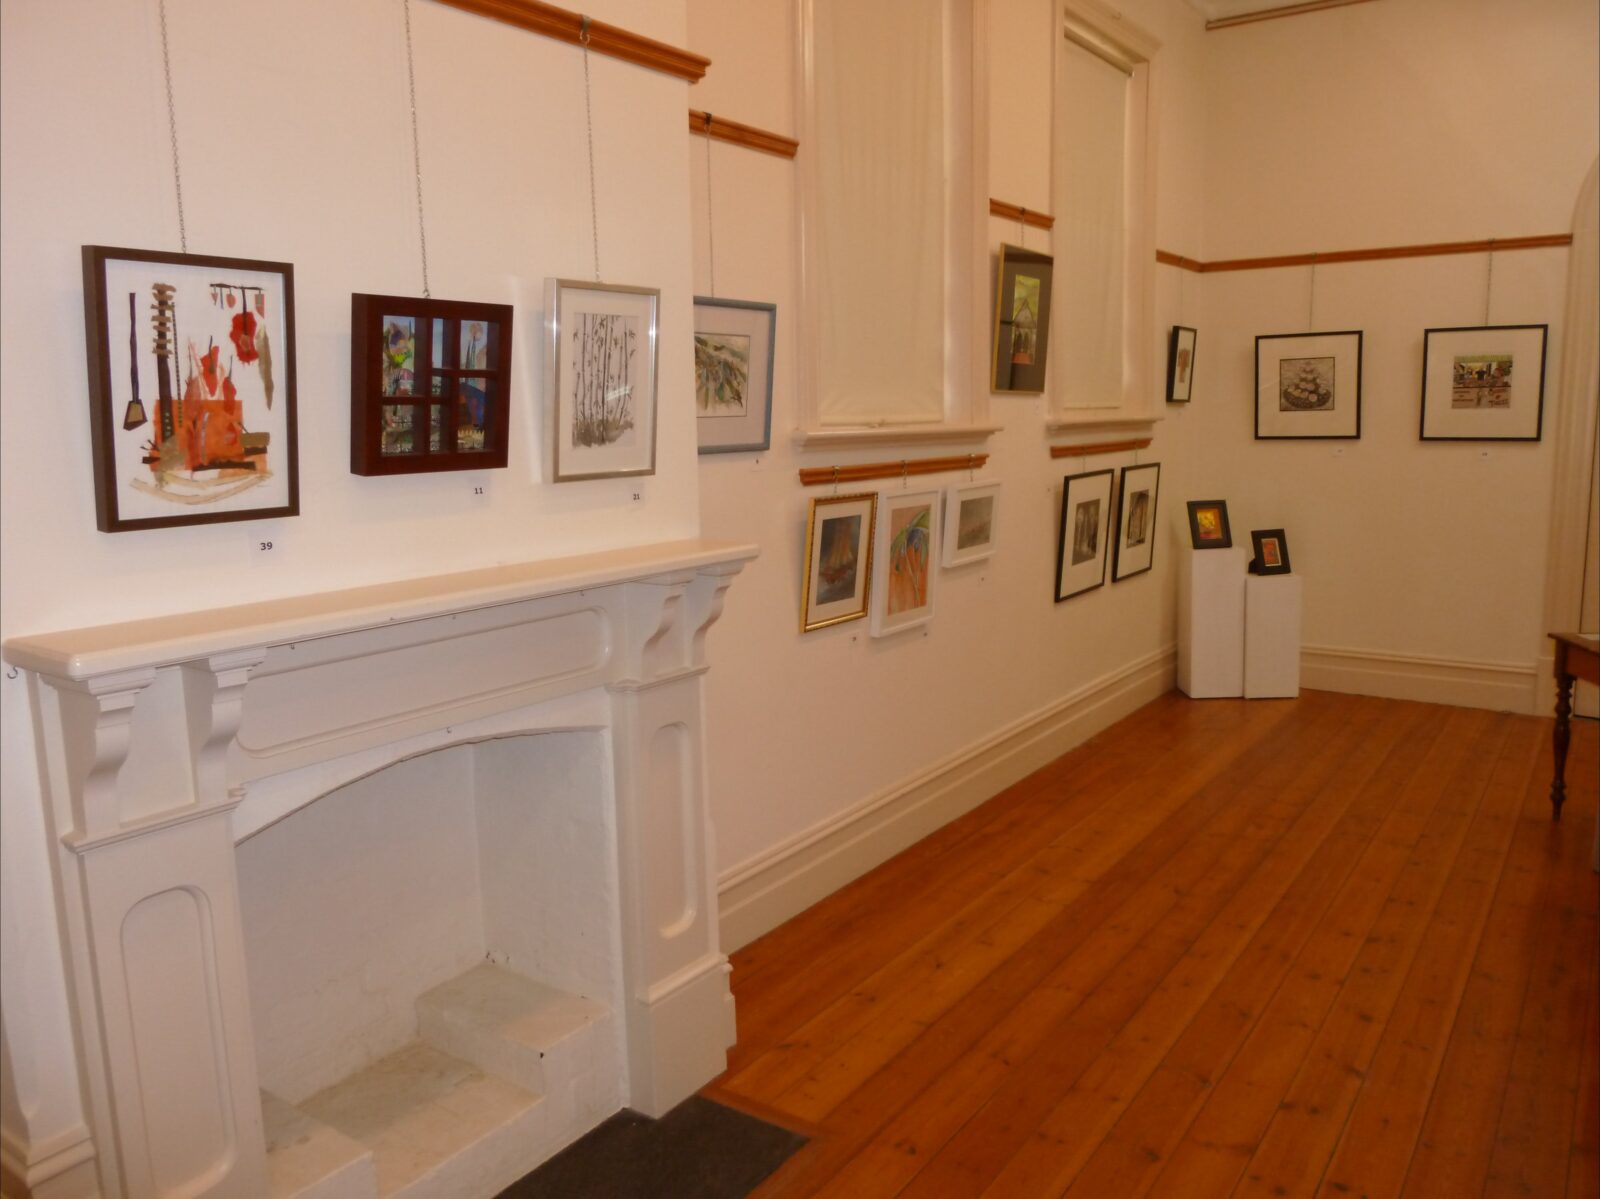 The main exhibtion space during From City to Country exhibition